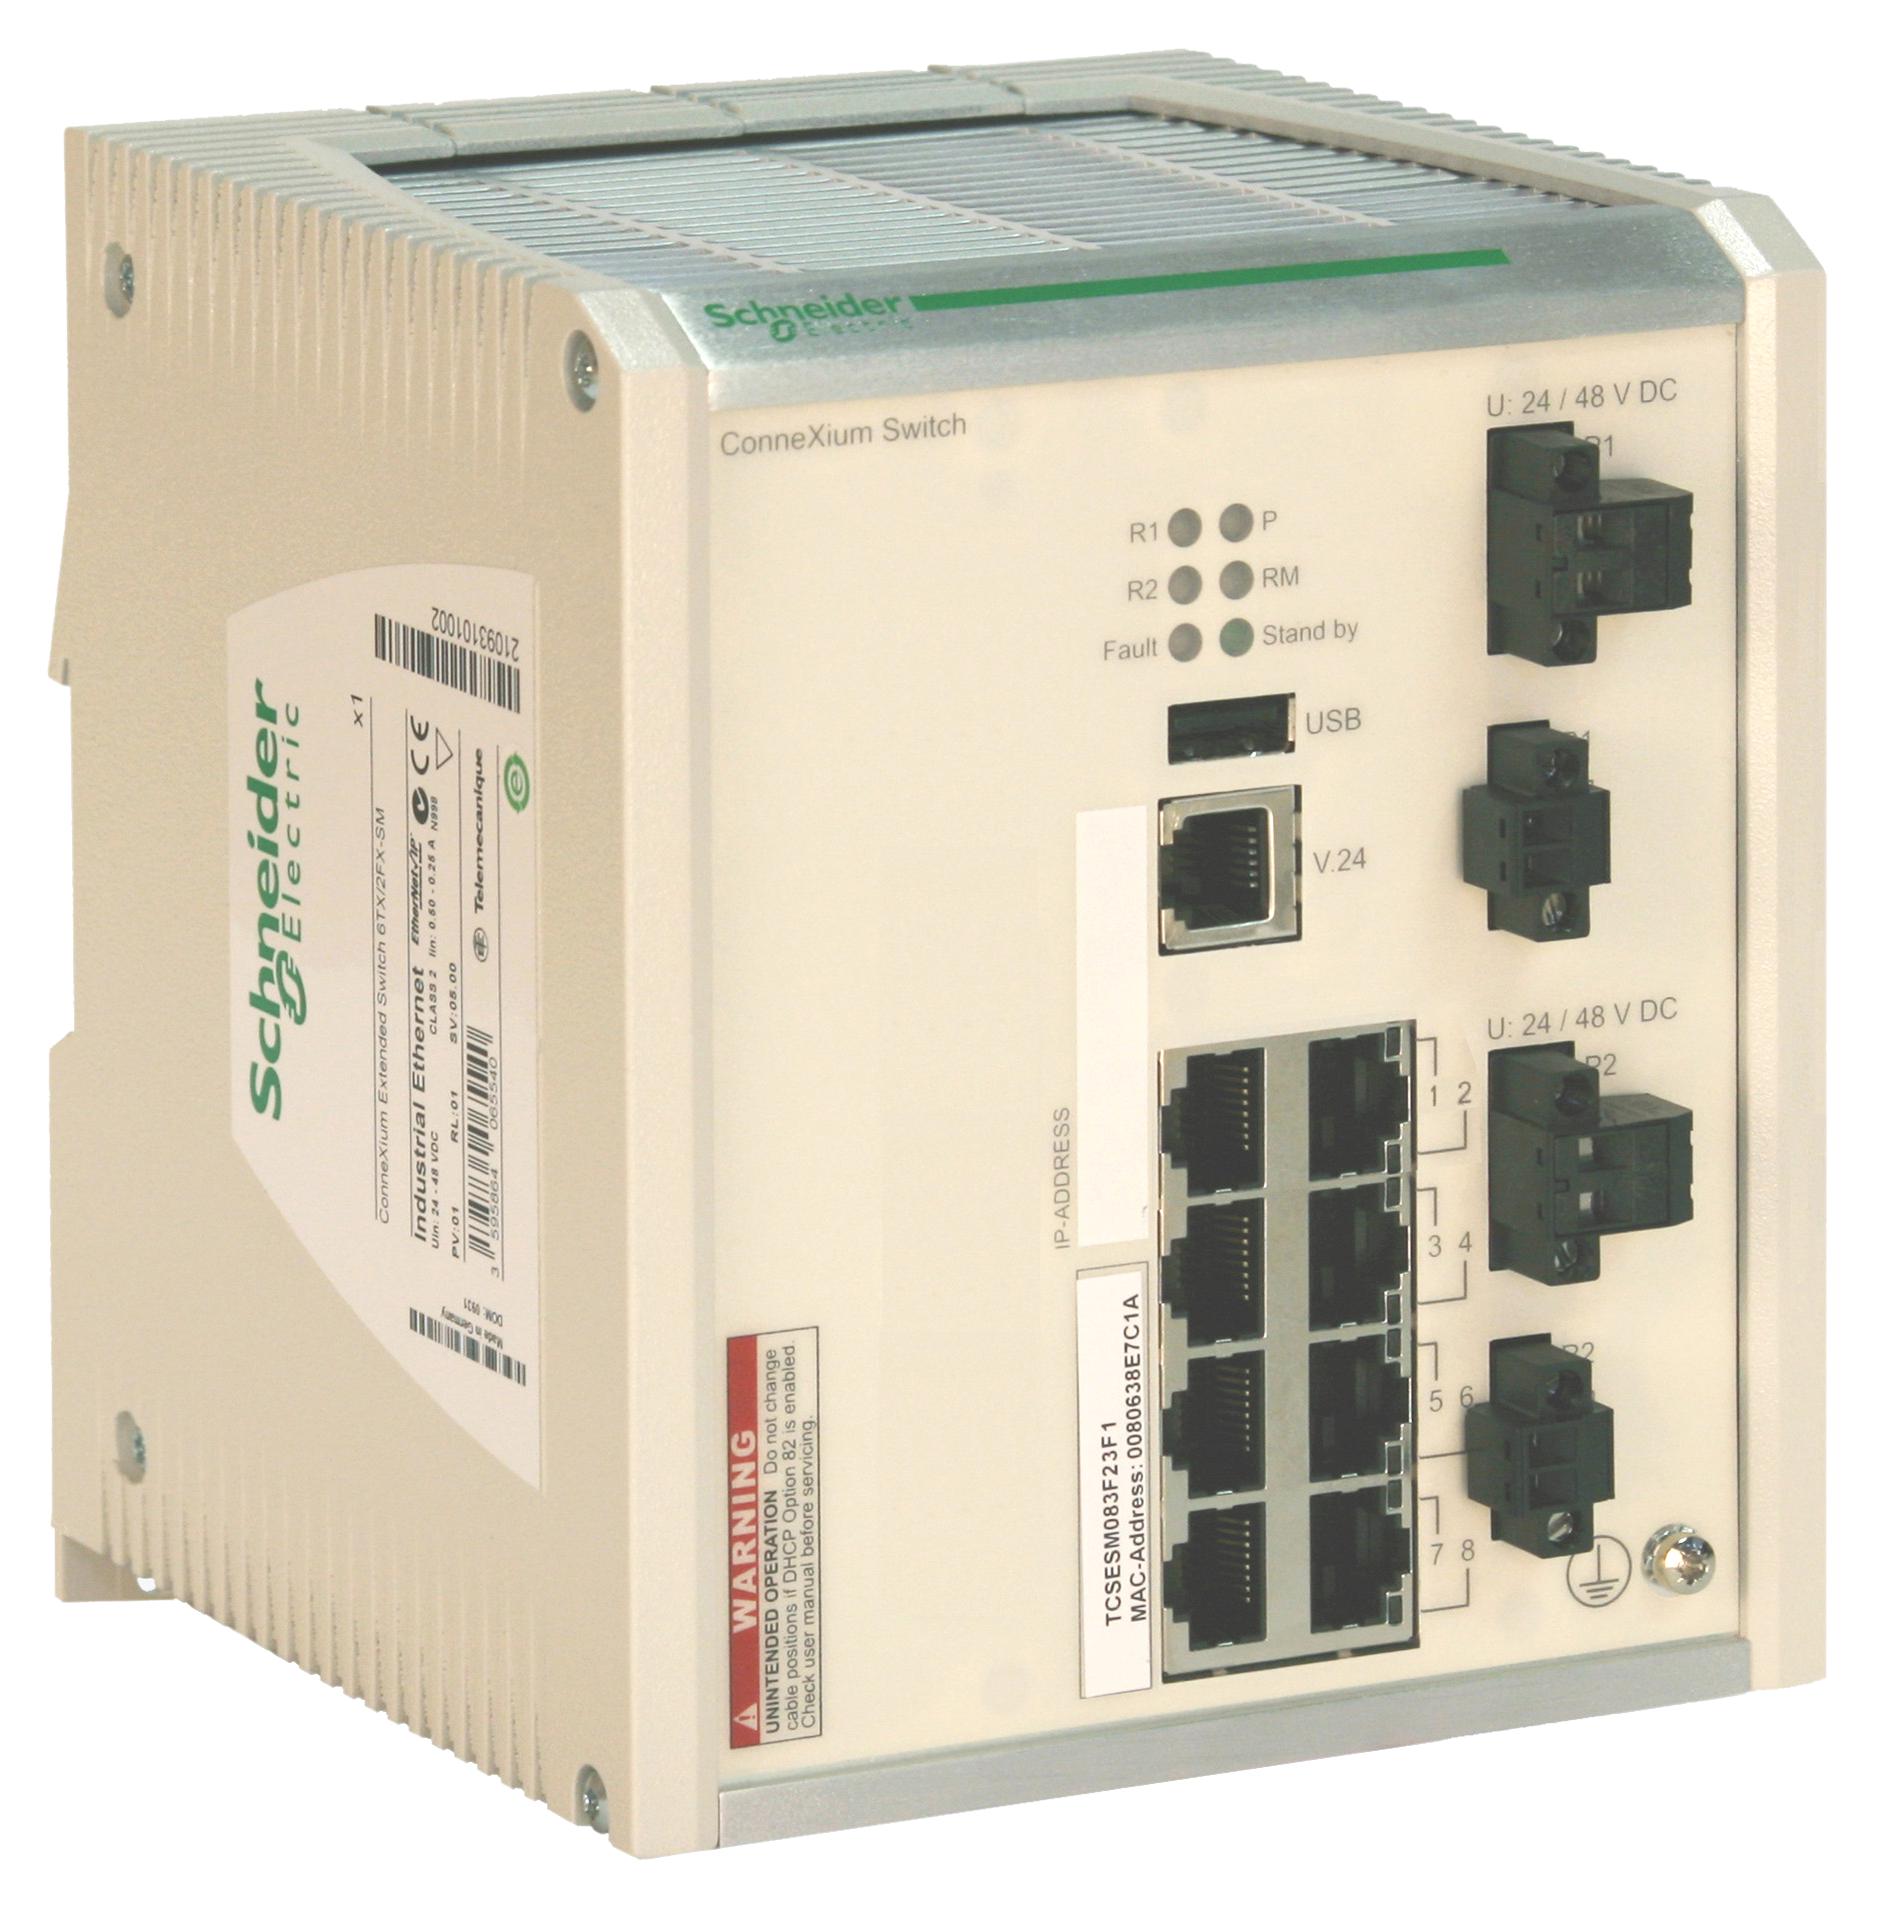 TCSESM083F23F1 CONNEXIUM EXTENDED SWITCH 8TX SCHNEIDER ELECTRIC